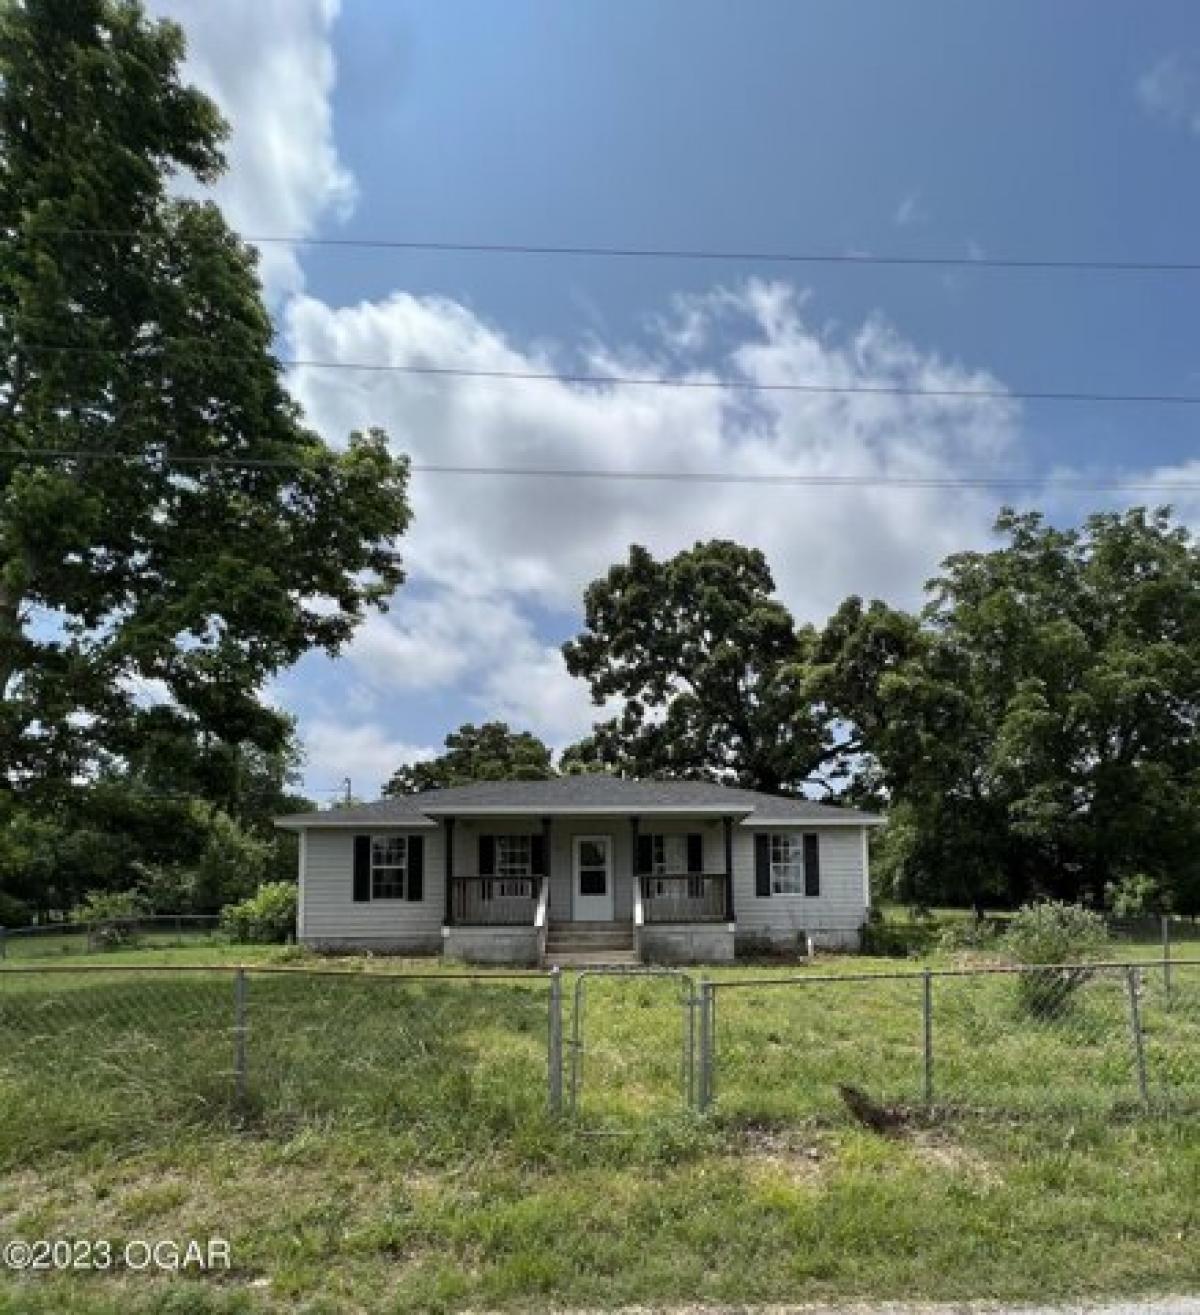 Picture of Home For Sale in Granby, Missouri, United States